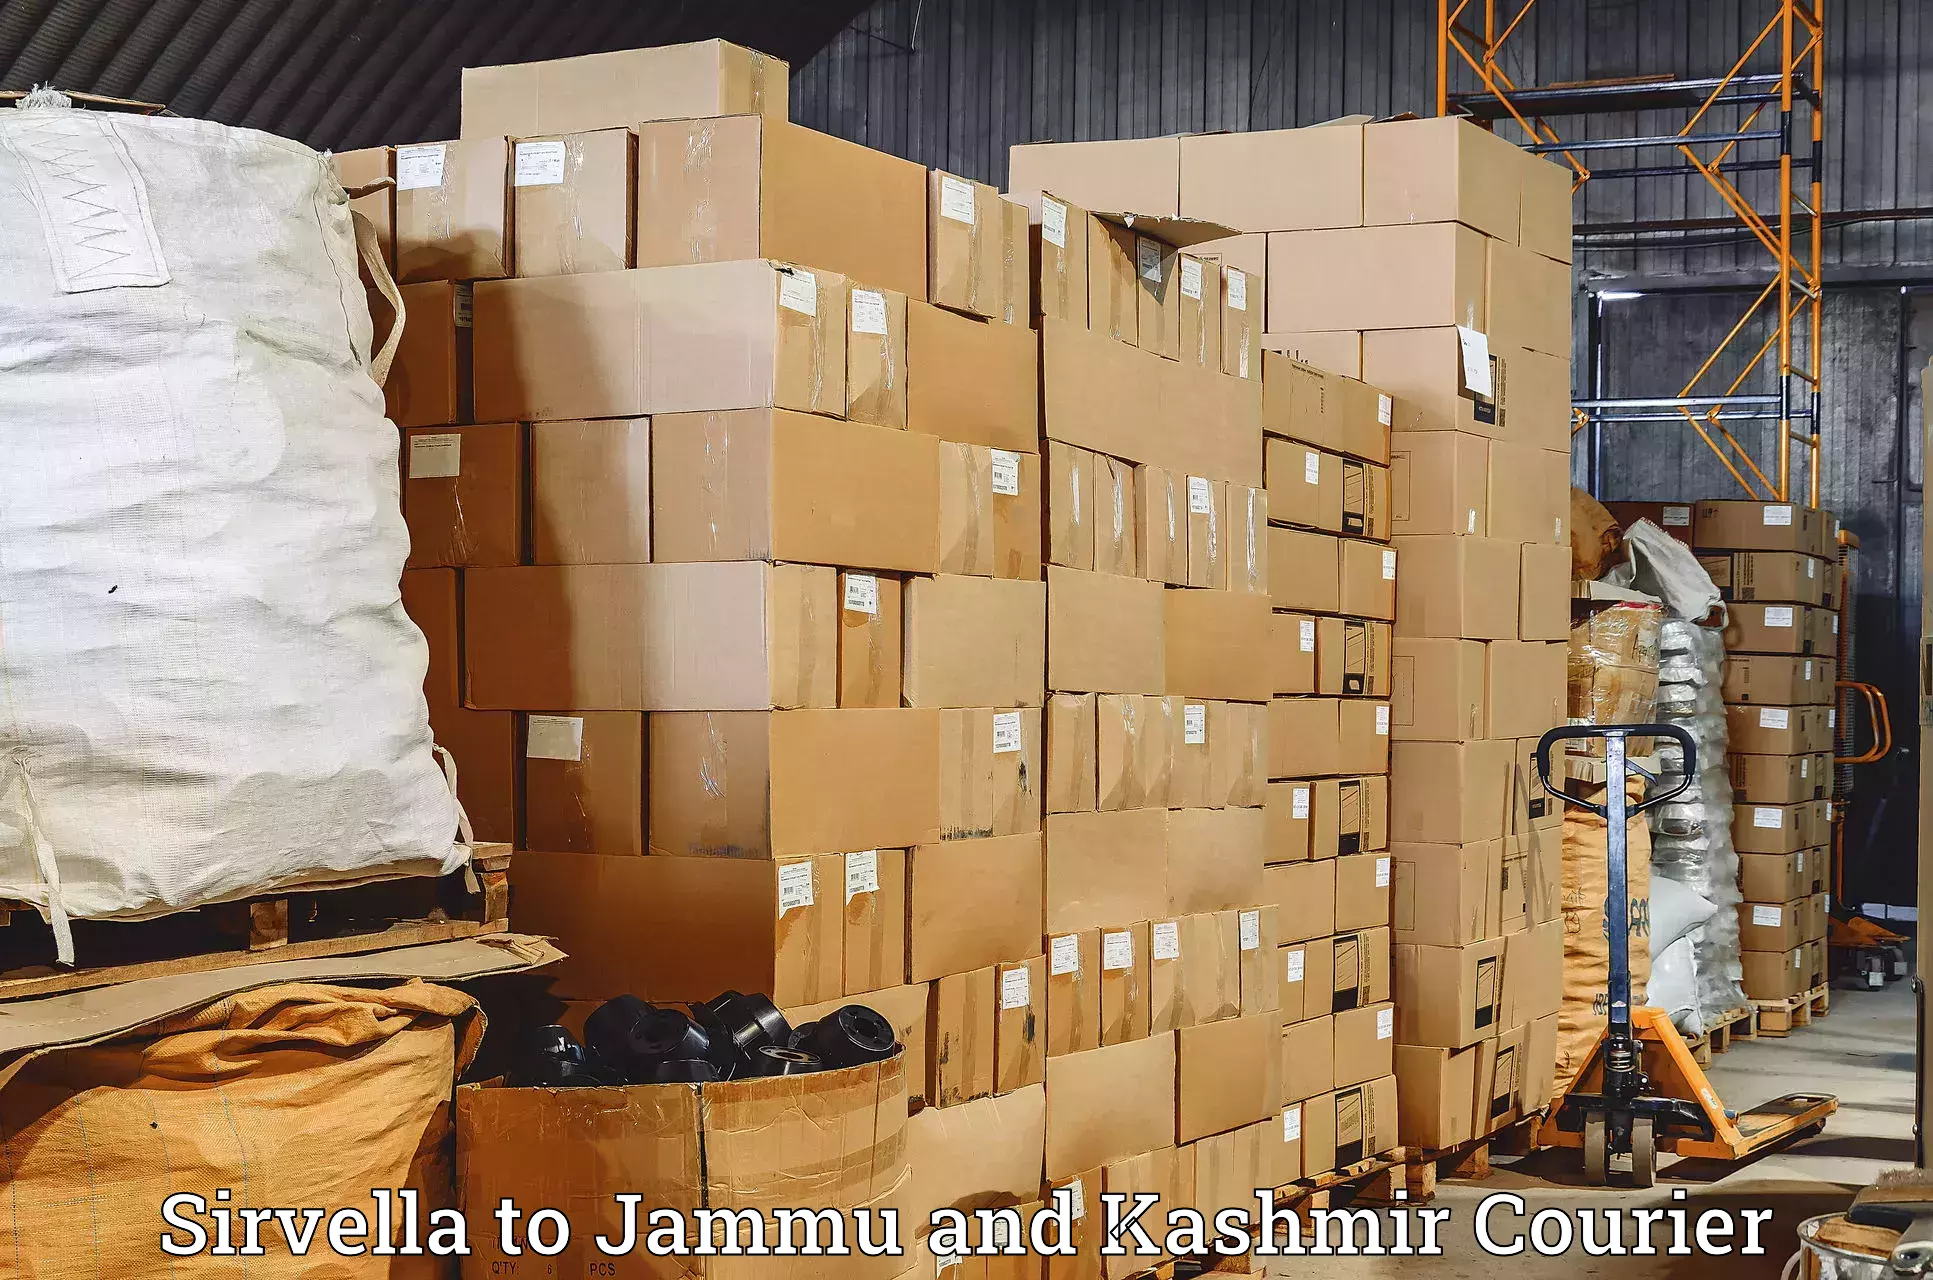 Reliable shipping partners Sirvella to Katra